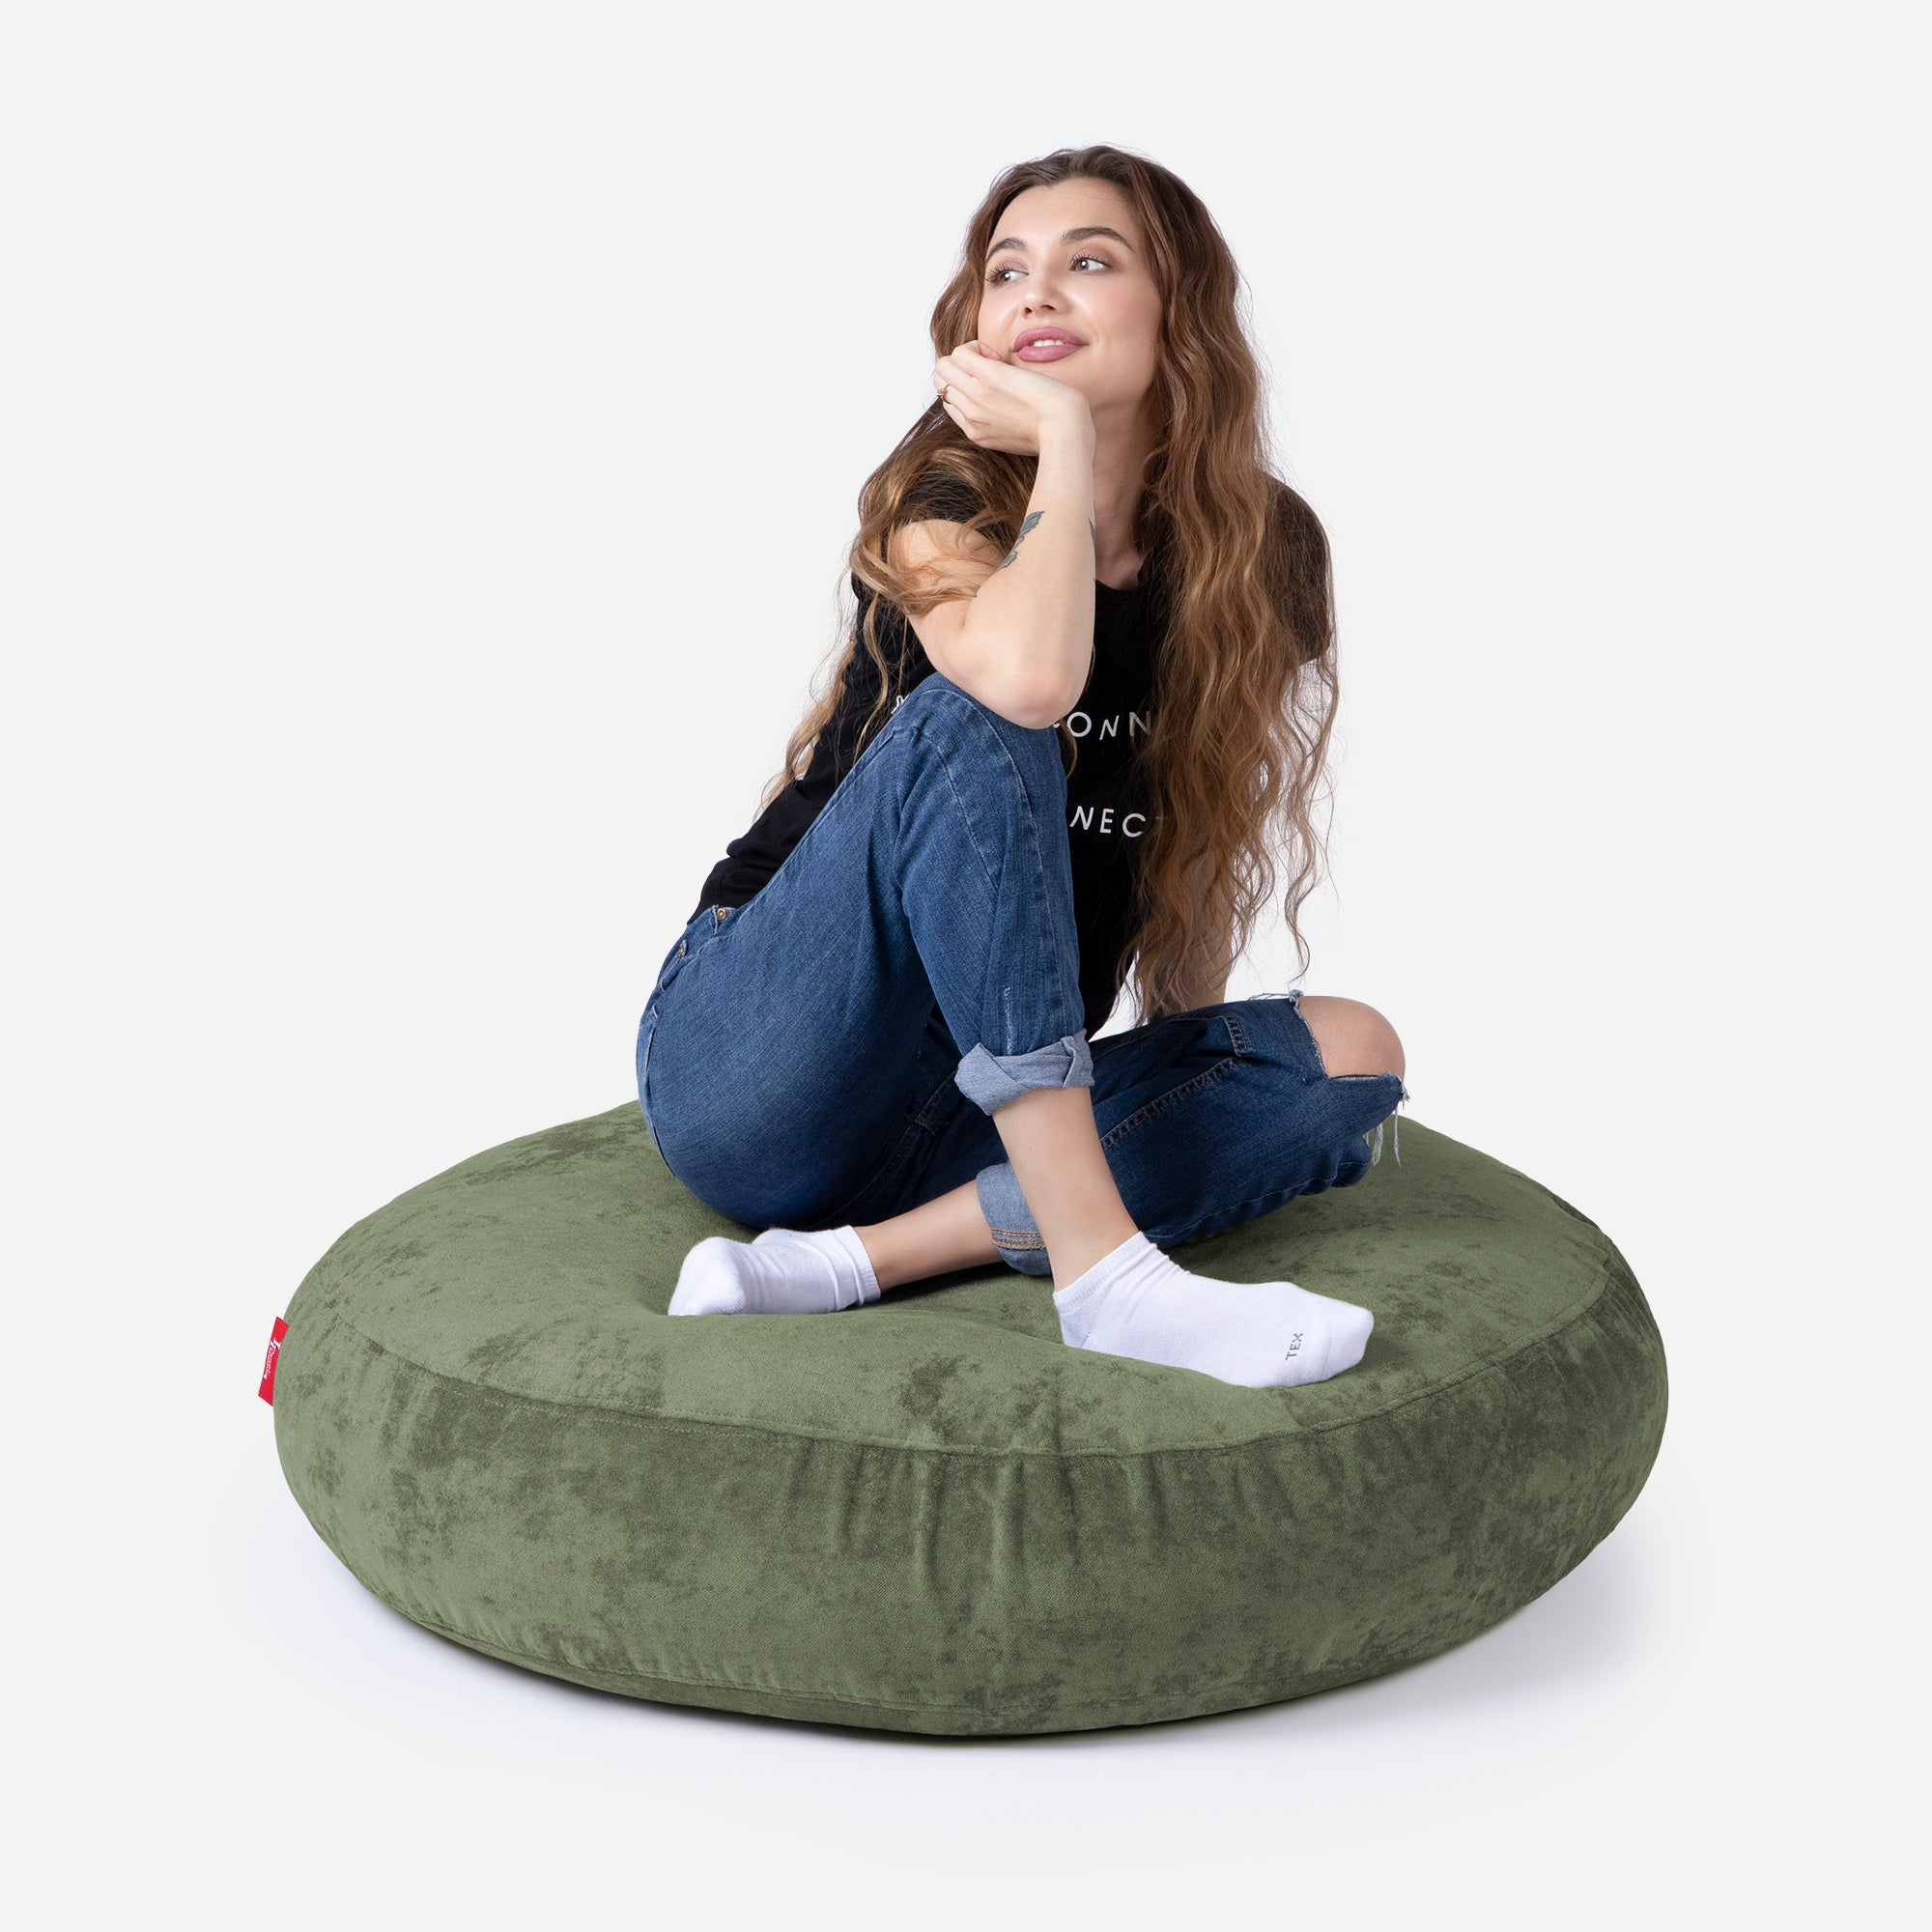 Pouf, Ottoman Khaki color by Lanny with girl seating on it 